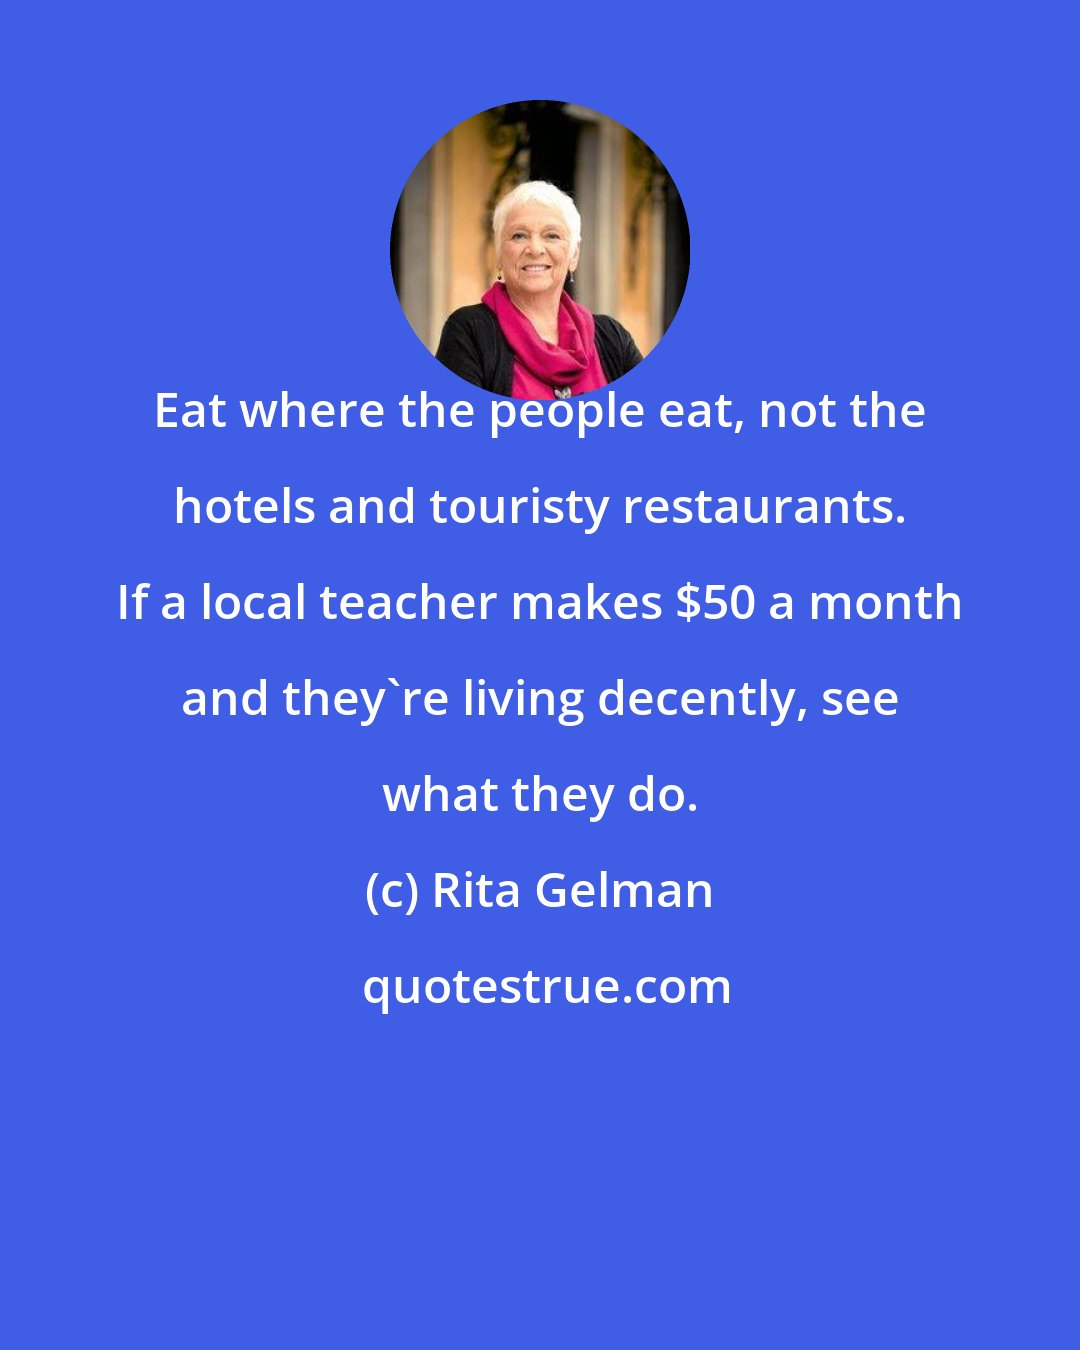 Rita Gelman: Eat where the people eat, not the hotels and touristy restaurants. If a local teacher makes $50 a month and they're living decently, see what they do.